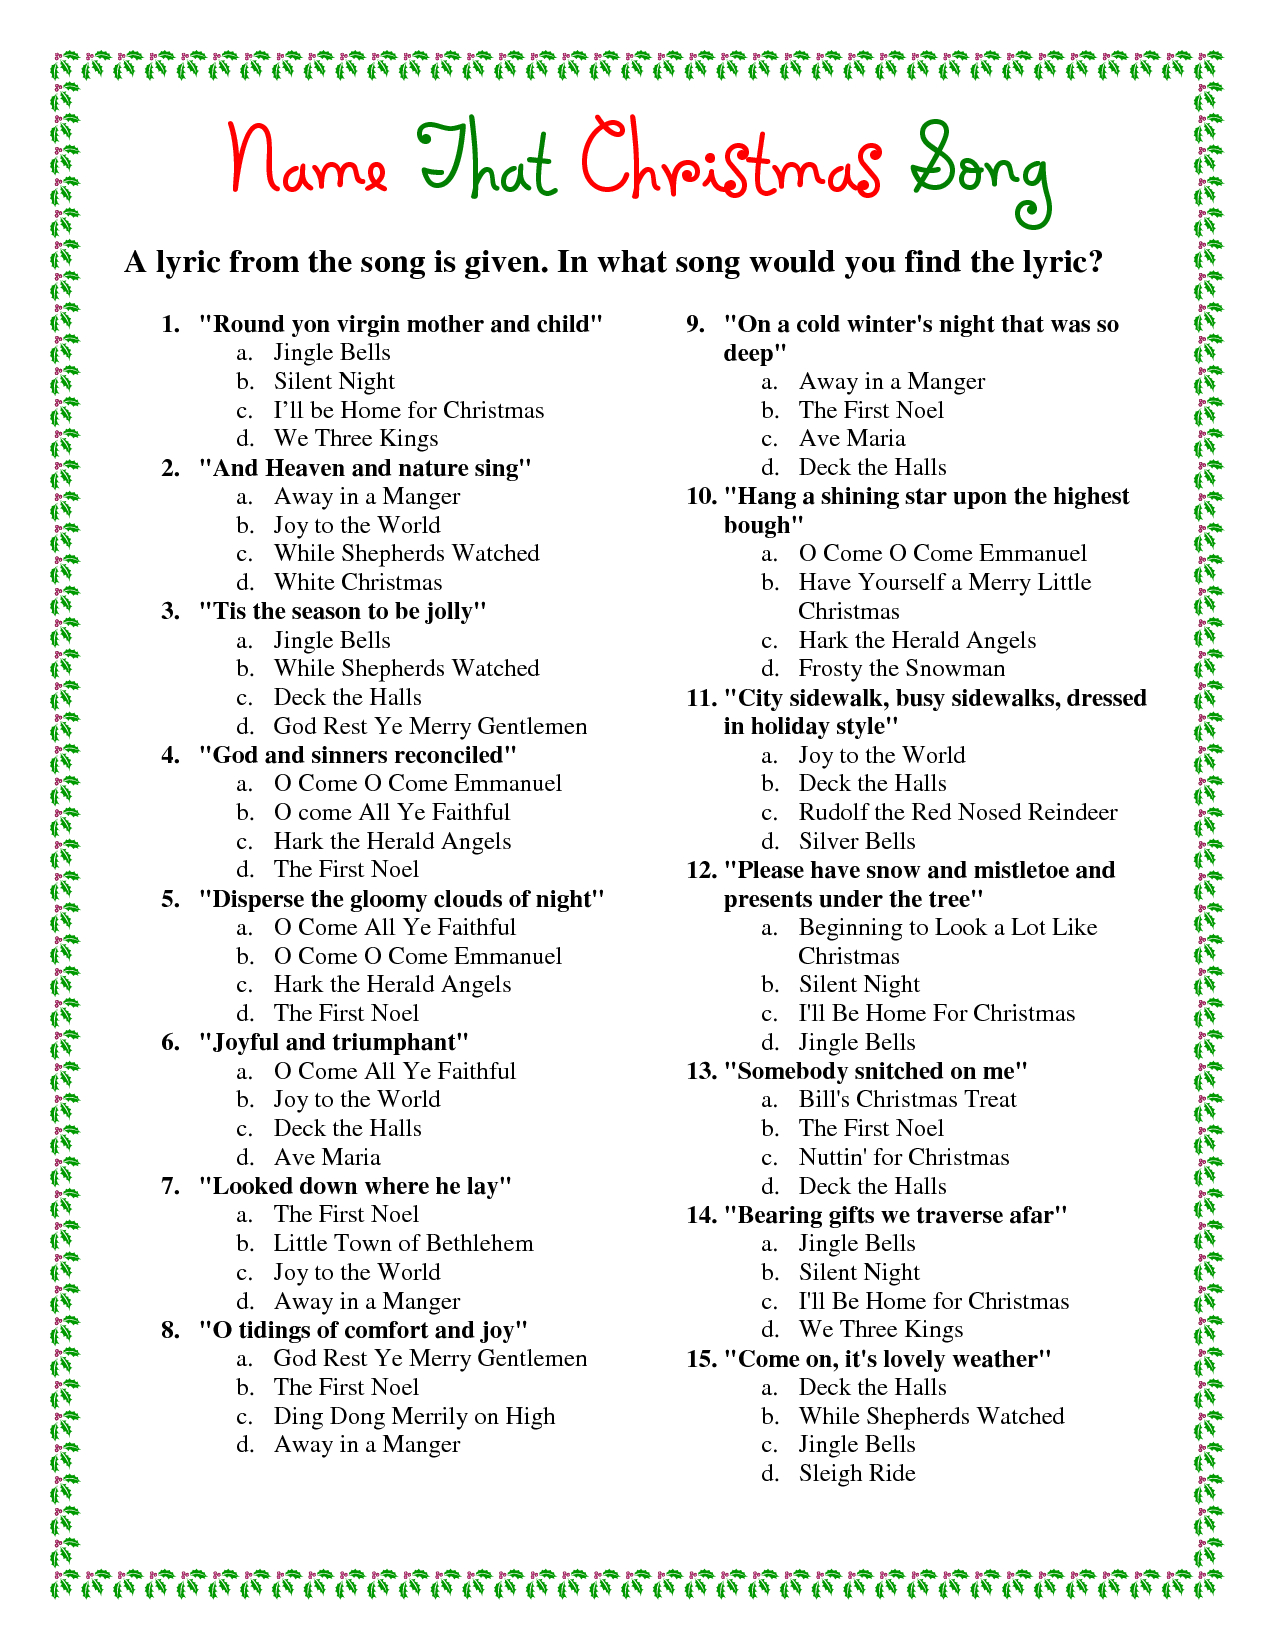 Free Christmas Trivia Game Lil 39 Luna Free Christmas Picture Quiz 